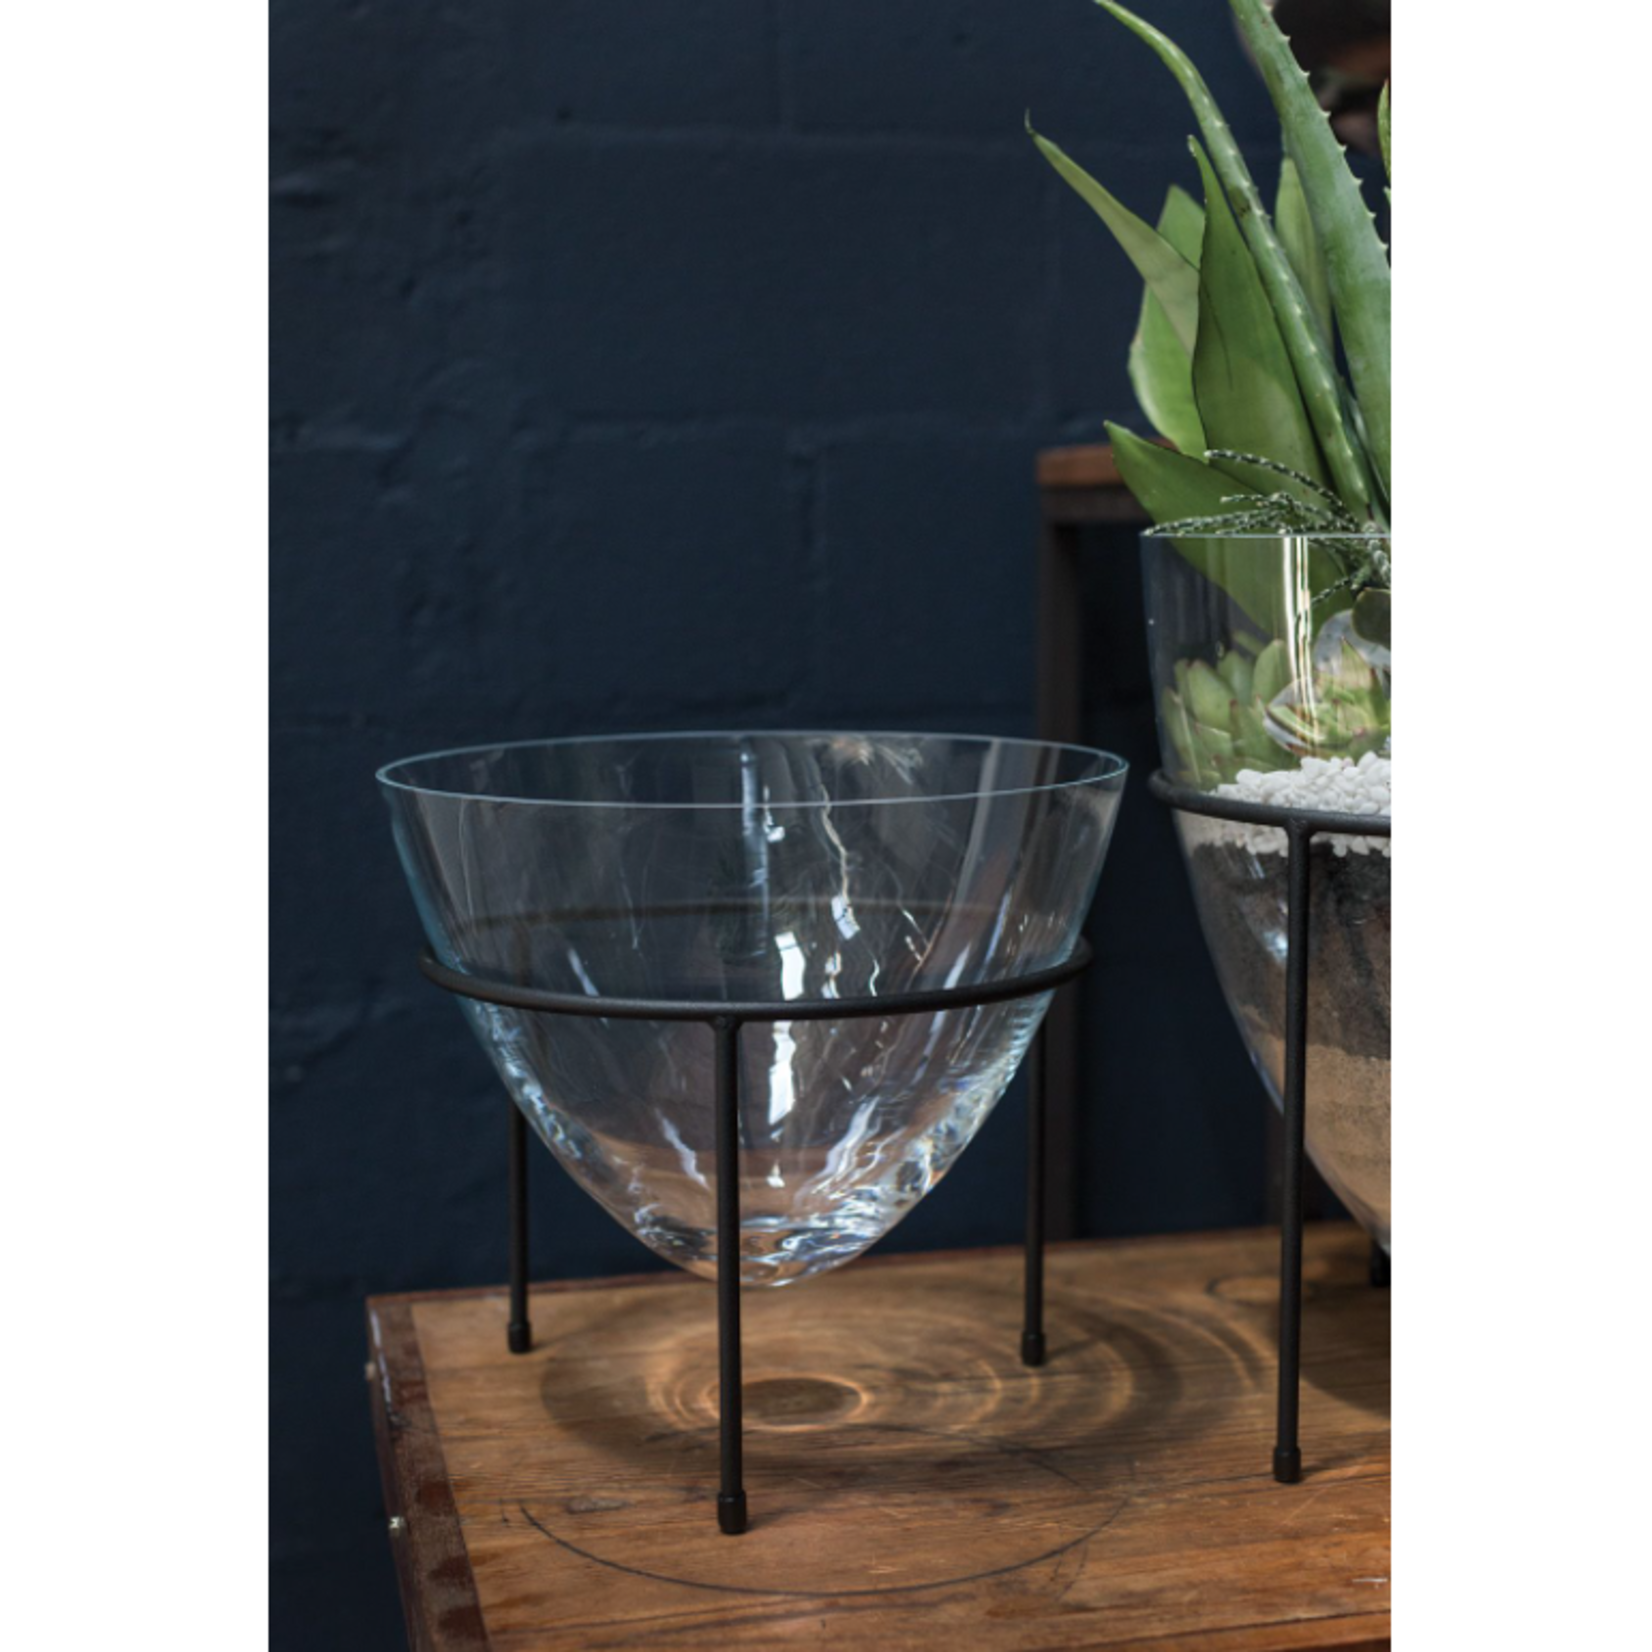 50% off was $92 now $46.00, 11”H X 12.25” GLASS ZILLA STAND